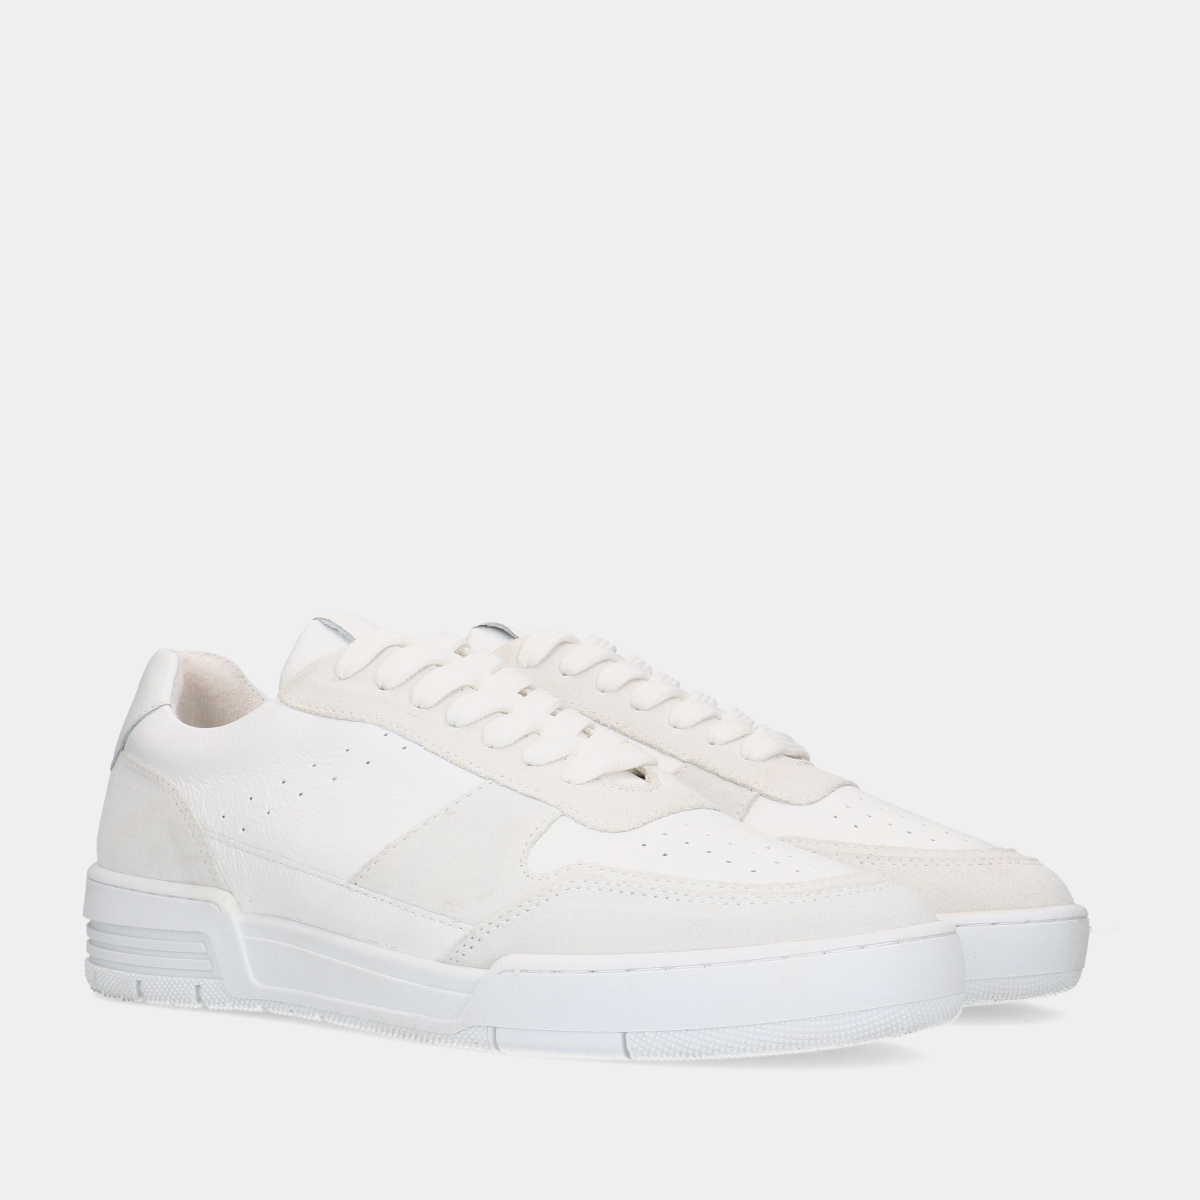 PS Poelman Kevin White heren sneakers